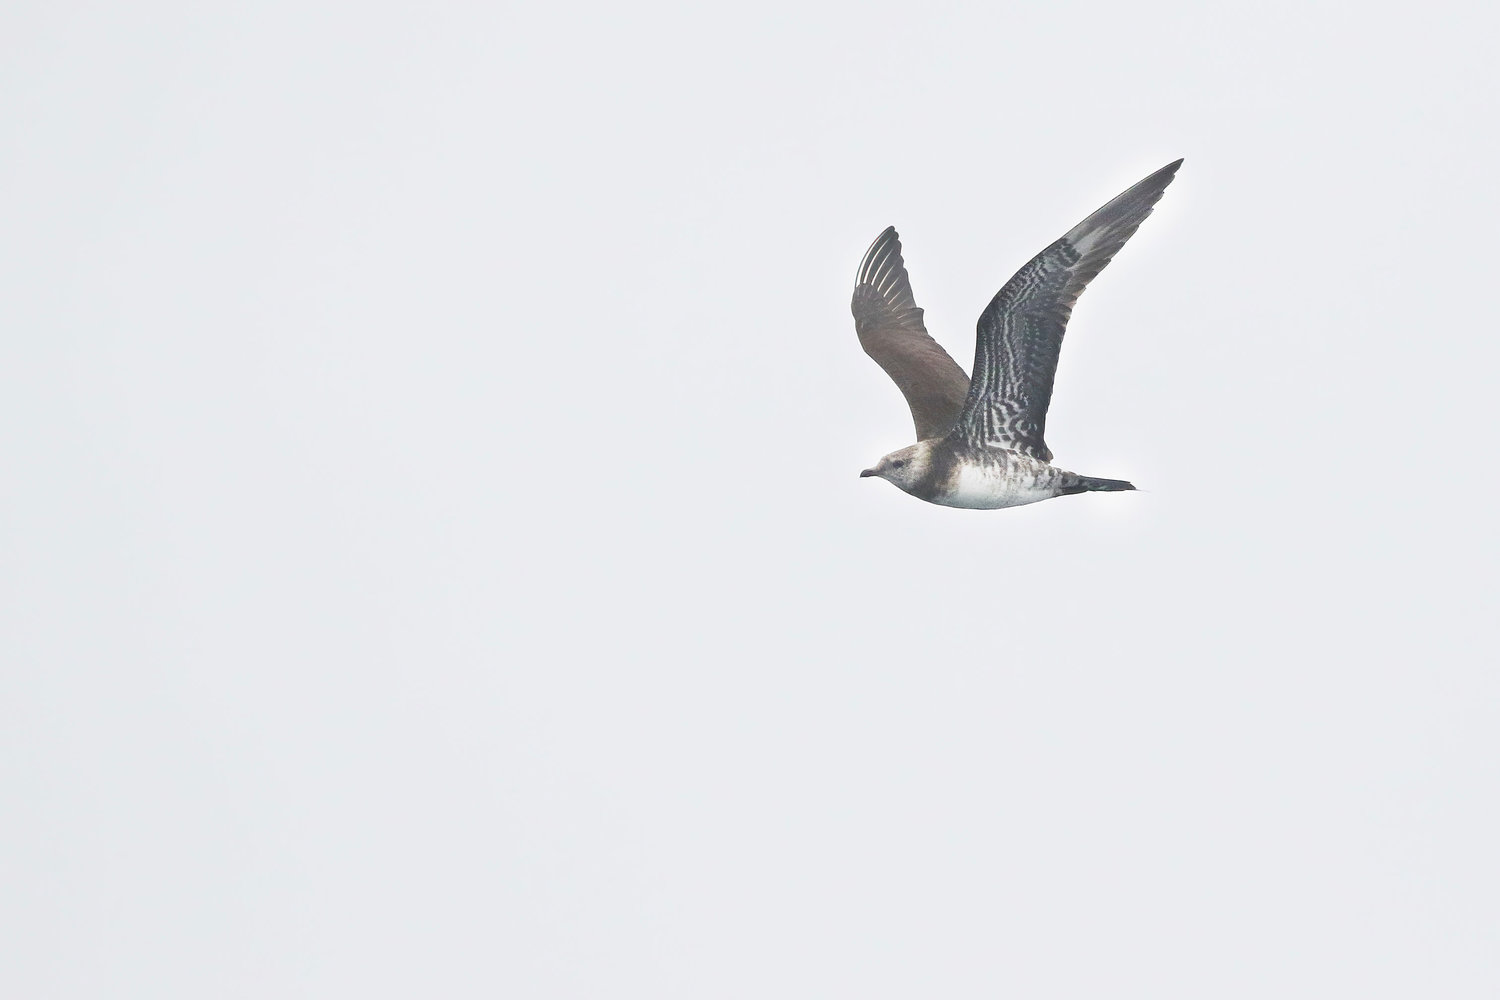 Parasitic Jaeger - can be found in South Puget Sound